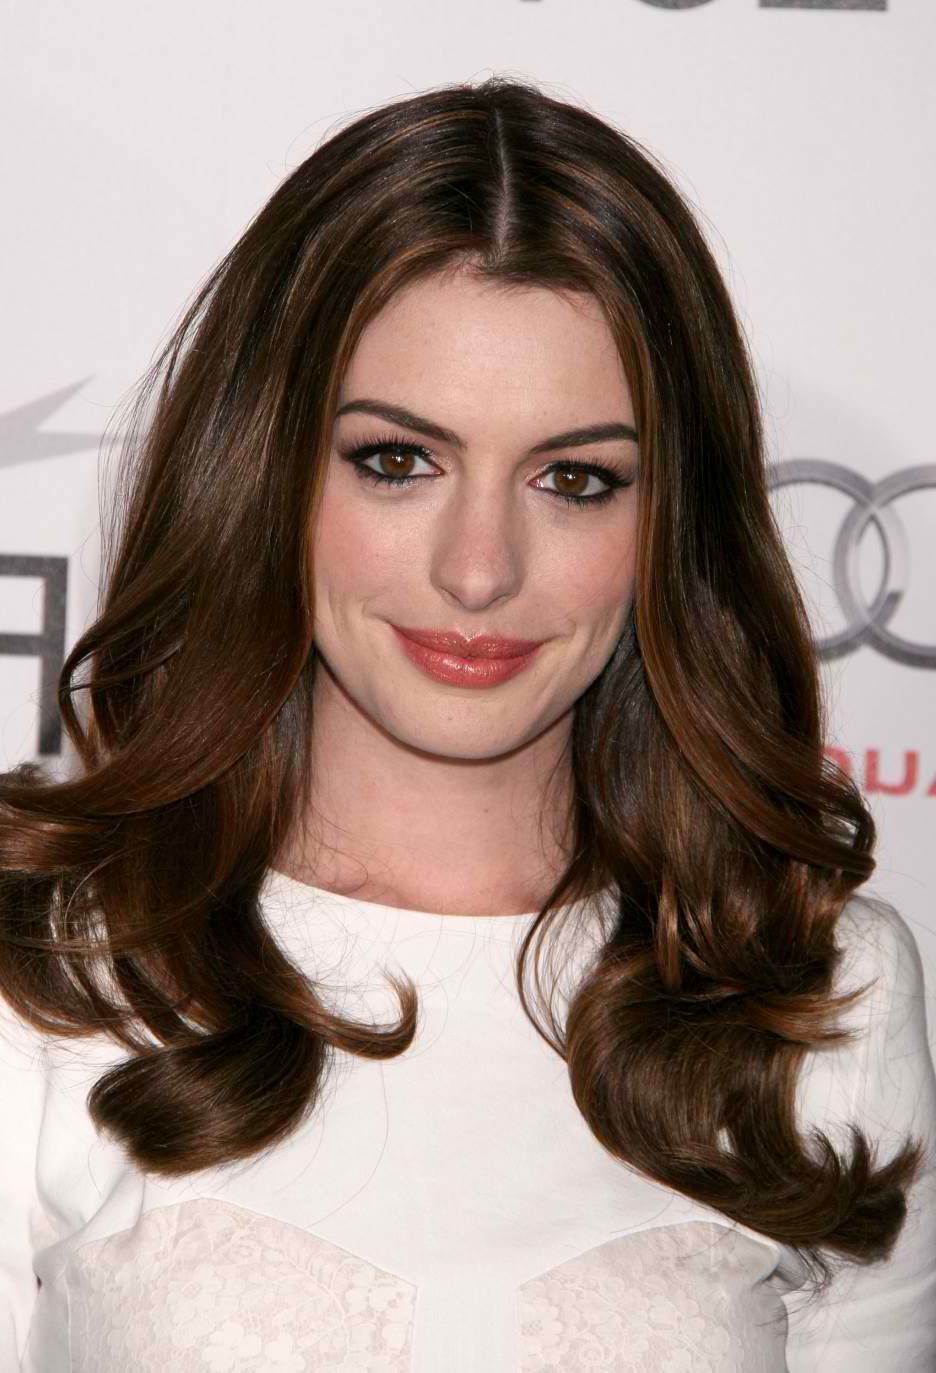 46 Beautiful Anne Hathaway Hairstyles | Hairstylo Throughout Anne Hathaway Short Hairstyles (View 20 of 25)